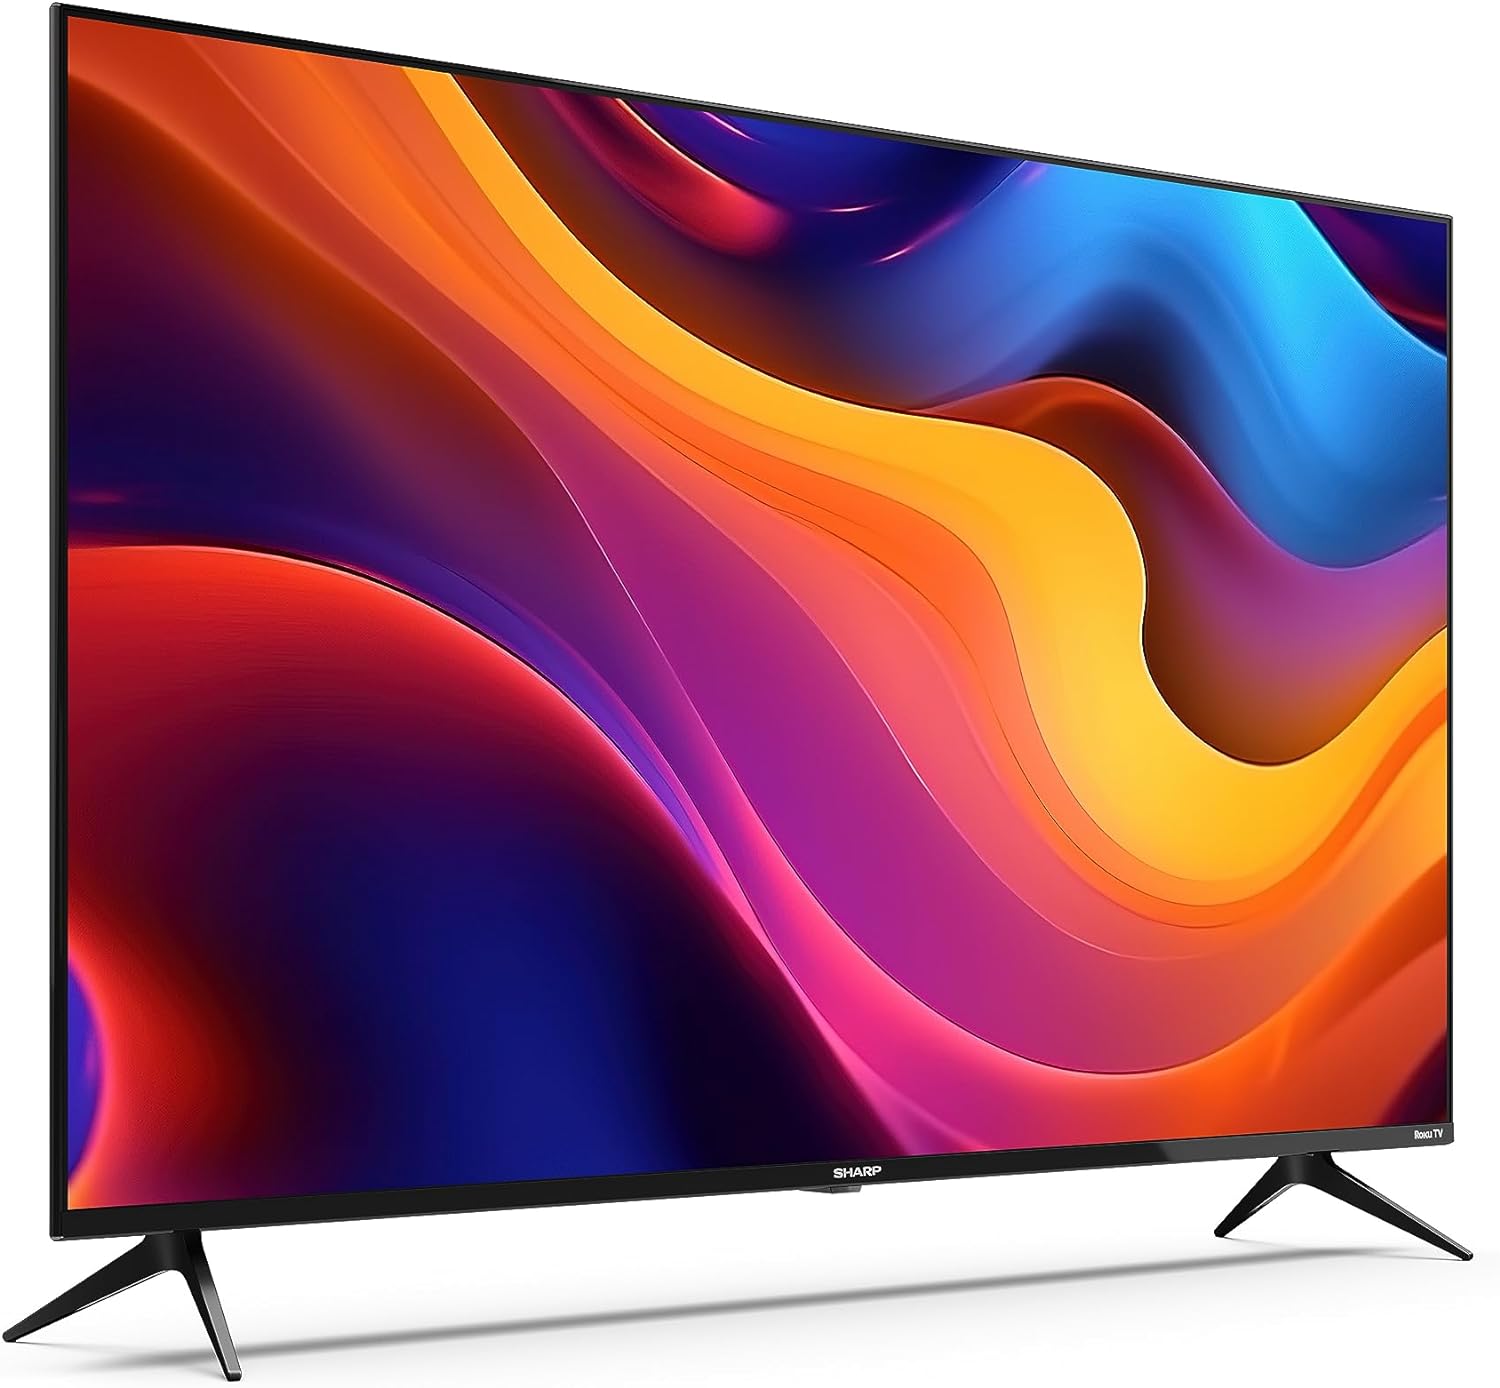 SHARP 55FJ6K 55 - Inch 4K UHD Smart Roku Frameless LED TV in Black with Active Motion 400, Dobly Vision, HDR10 + HLG Support, Freeview Play, Pre - Installed Apps, 3x HDMI & 2x USB - Amazing Gadgets Outlet